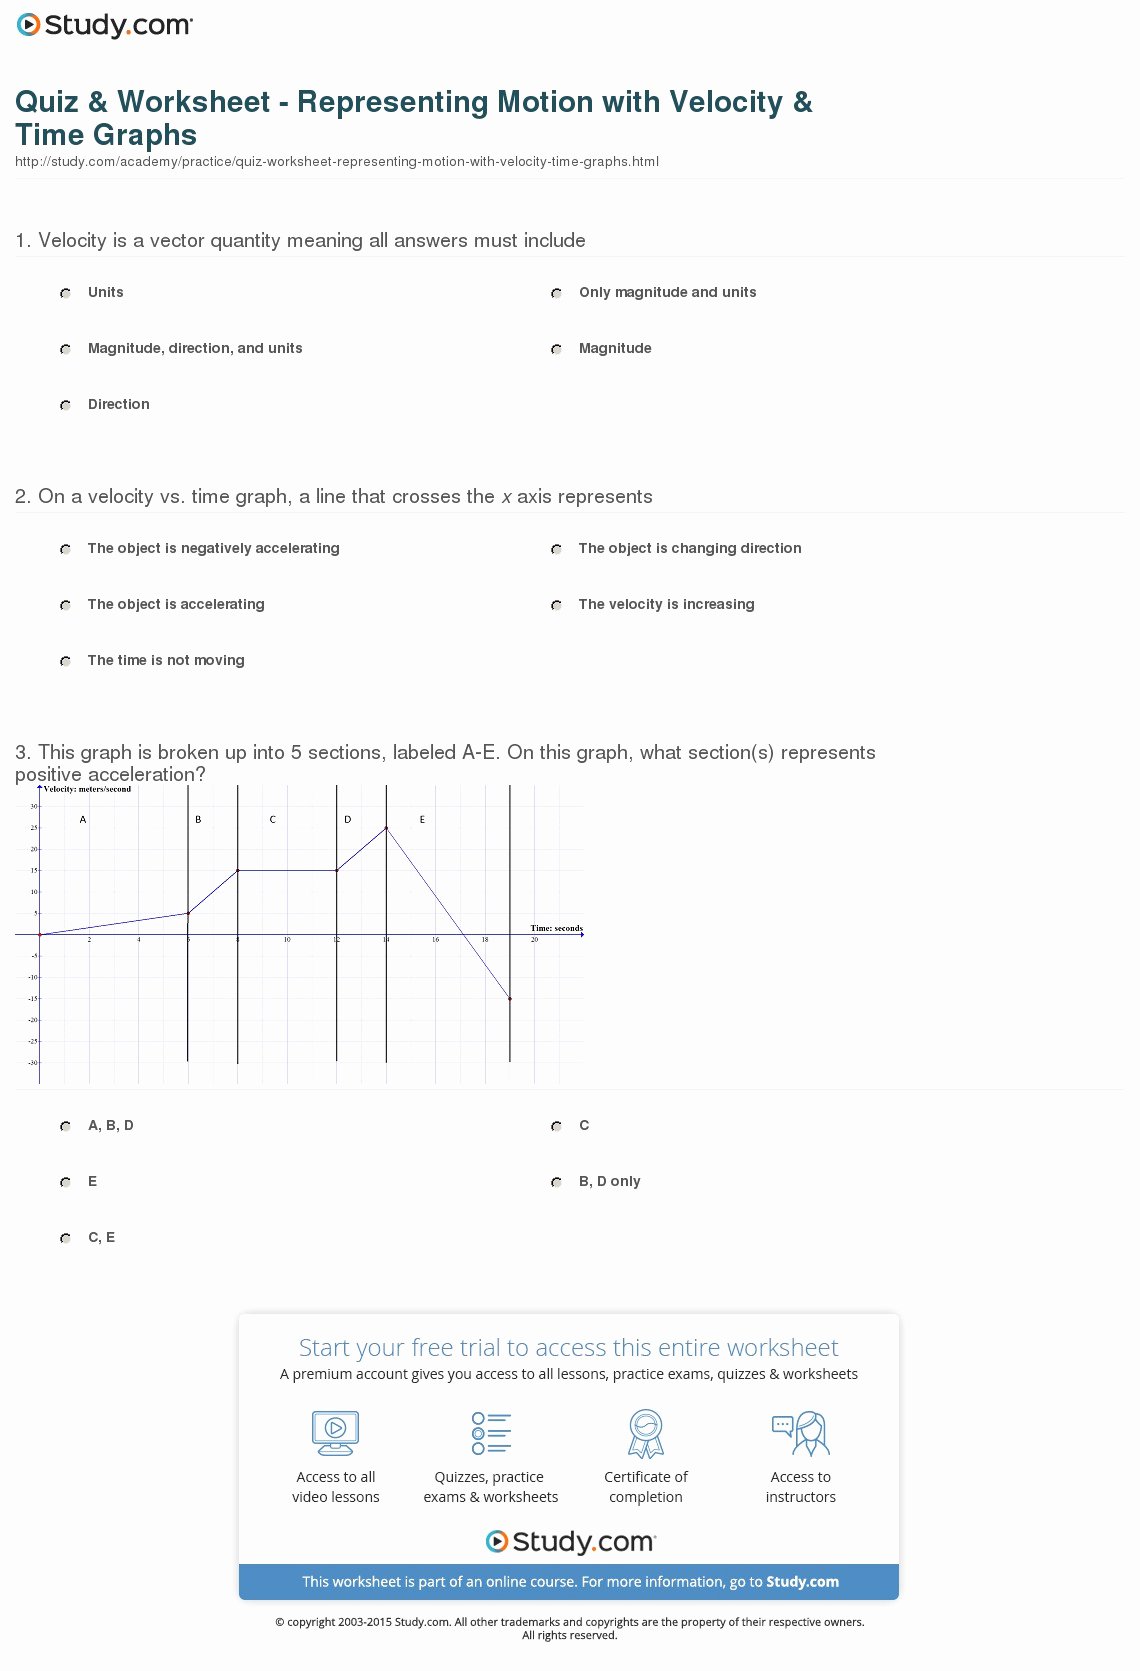 Velocity Time Graph Worksheet Answers Luxury Quiz &amp; Worksheet Representing Motion with Velocity